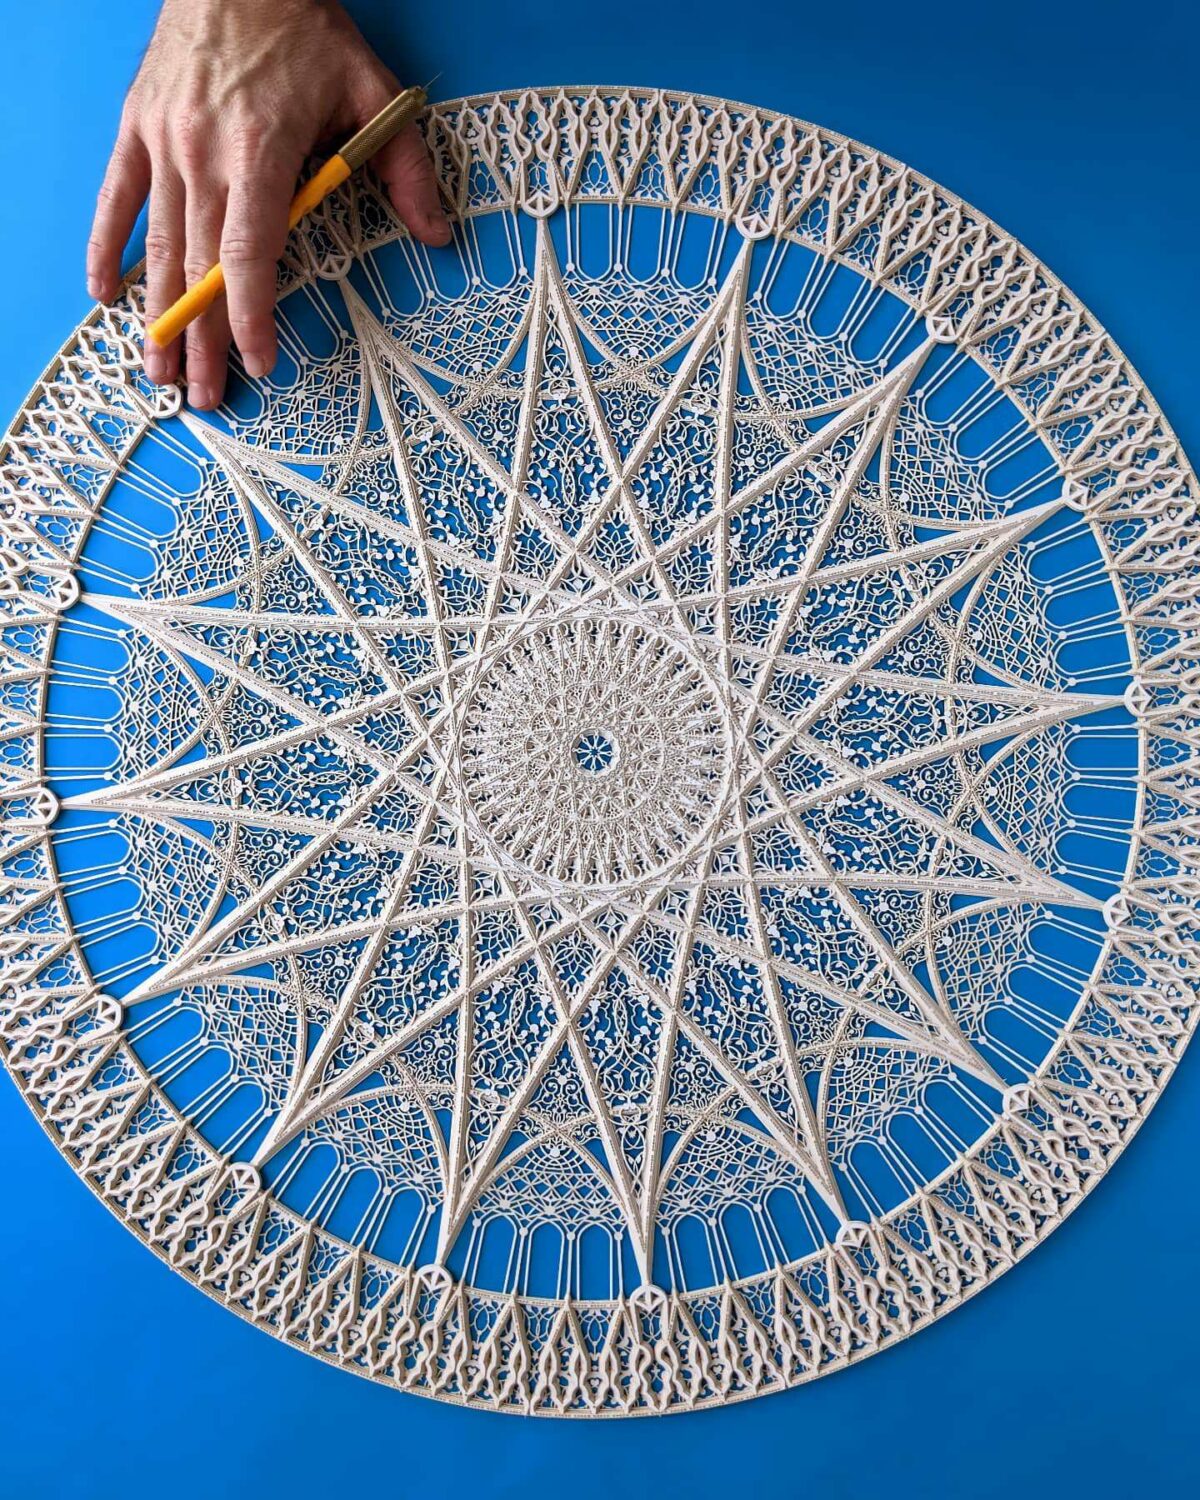 Intricate And Colorful Arabesque Made Of Laser Cut Paper Julia Ibbini 7